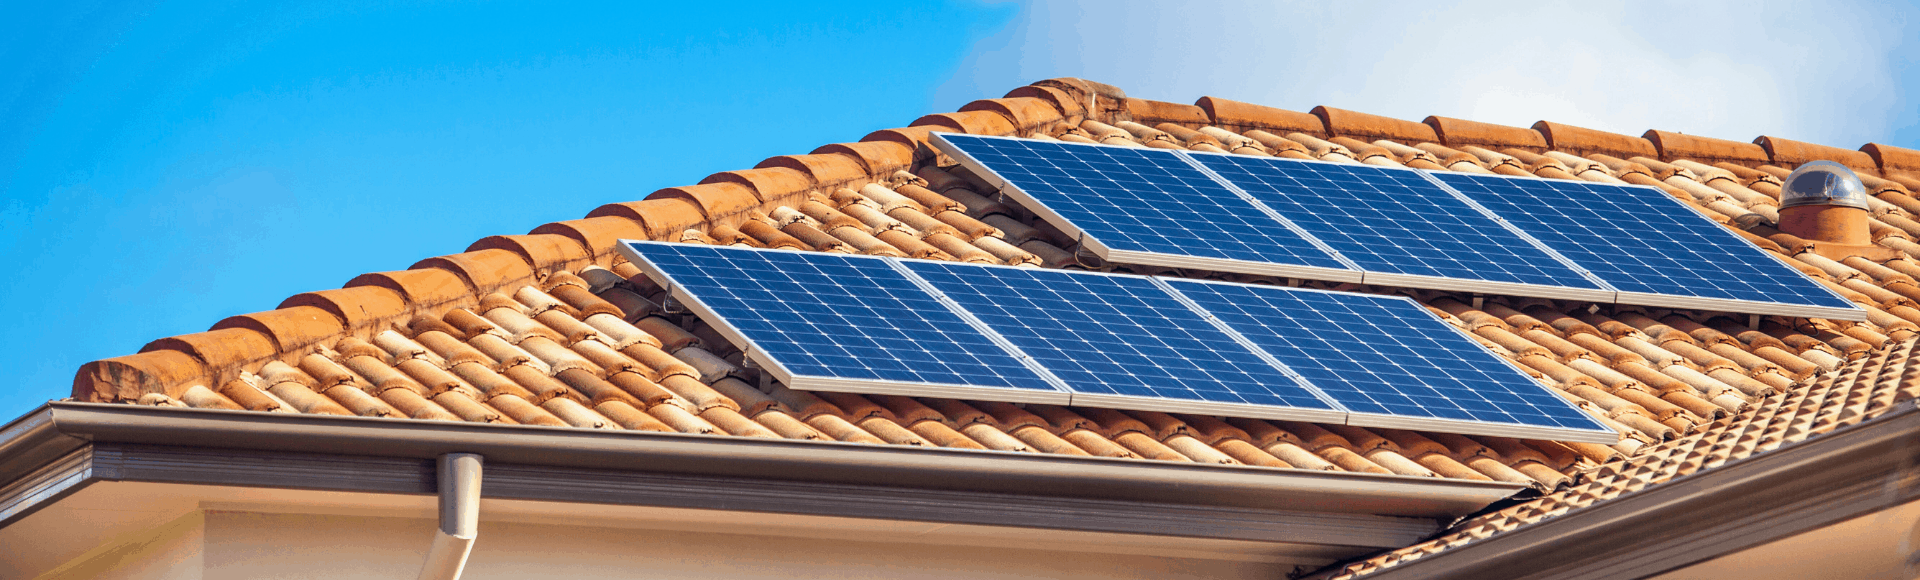 How much electricity does a 8kW solar system produce?